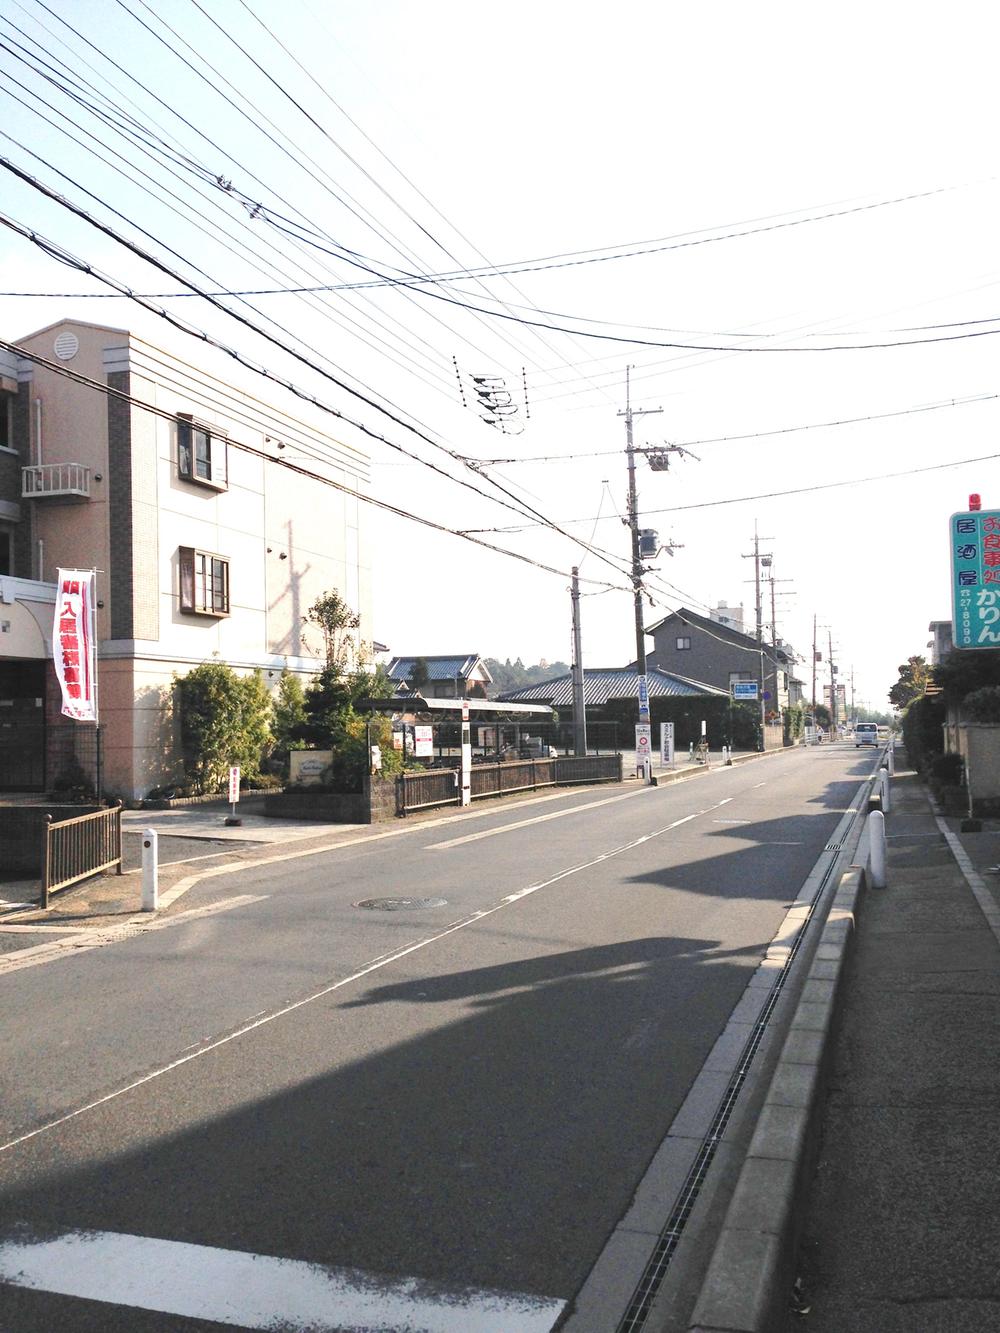 Local photos, including front road. Minamikidera the entire north-south road south